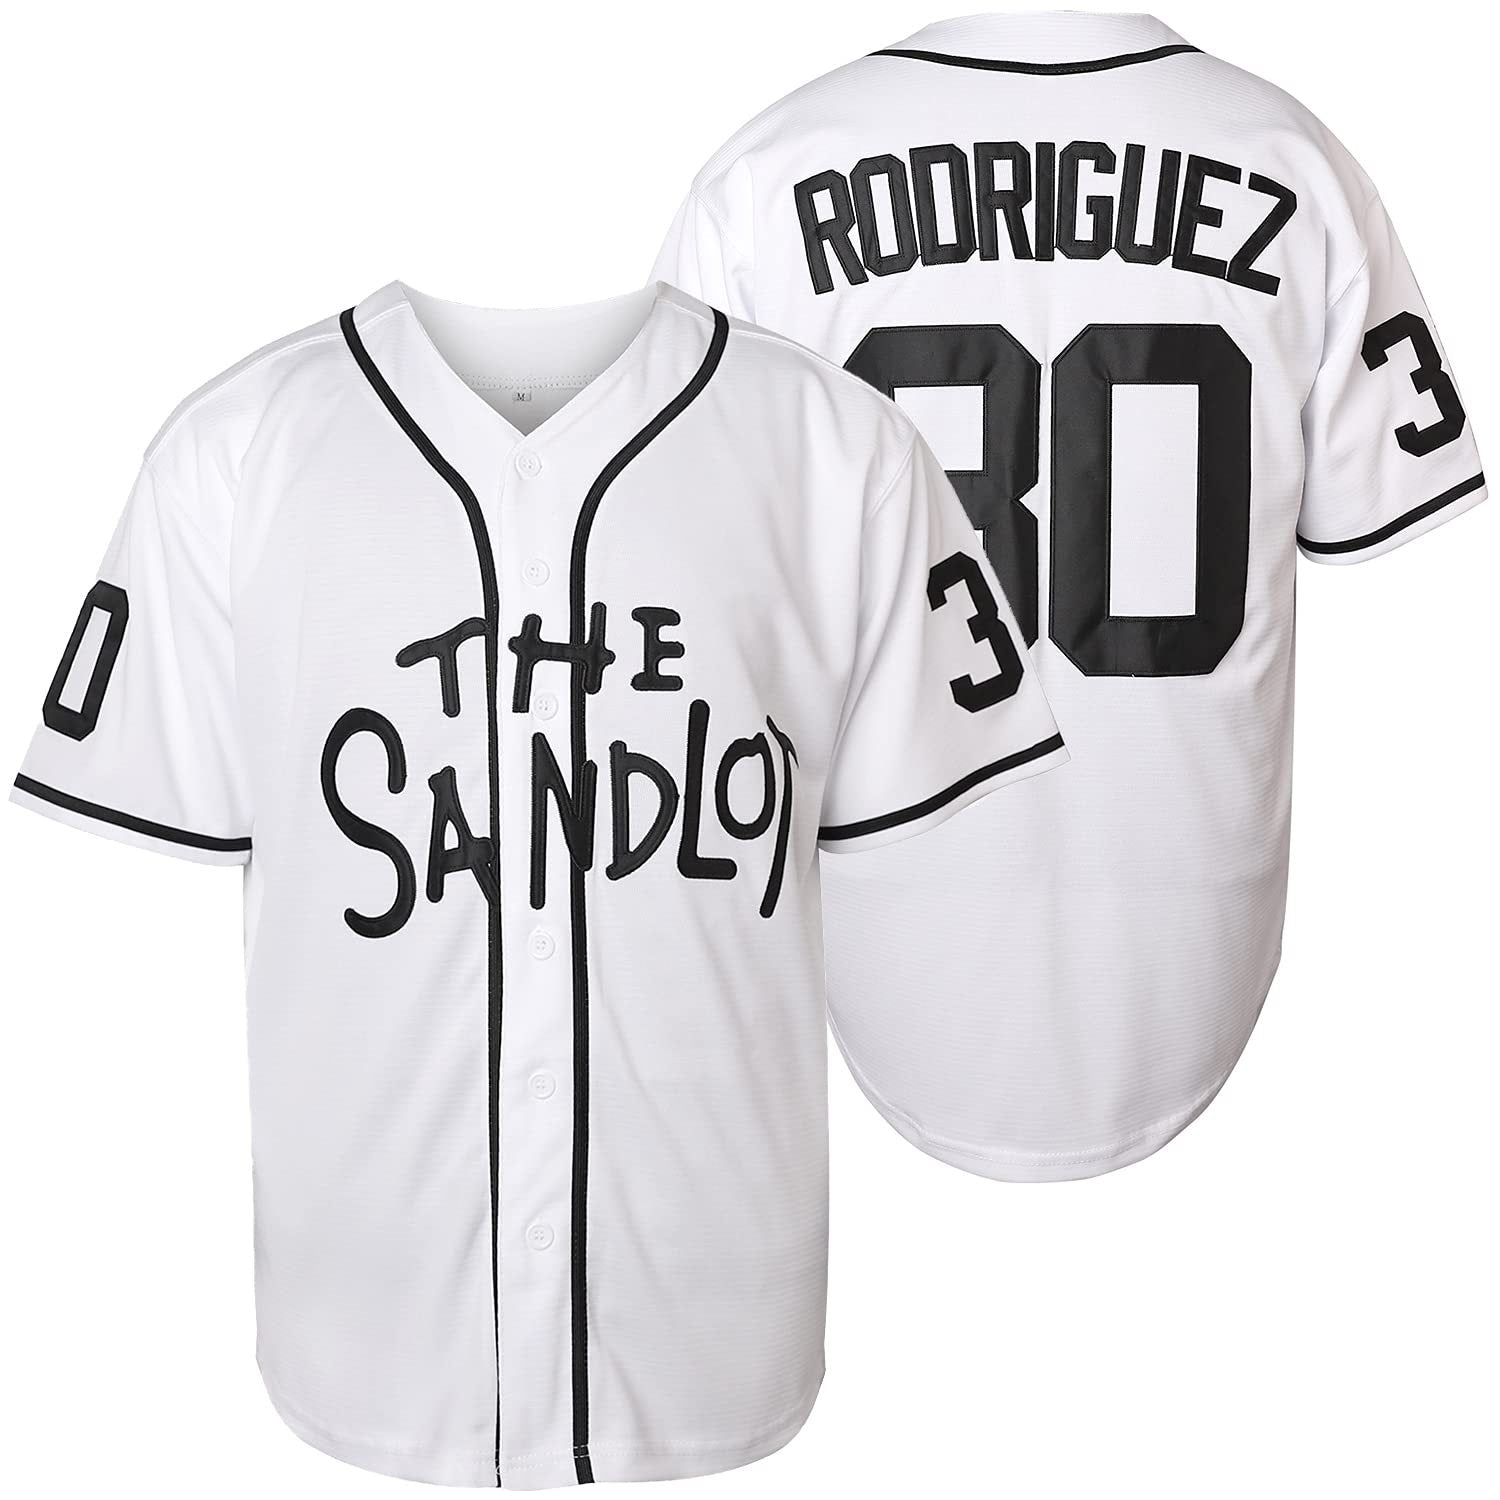 Benny The Jet Rodriguez #30 Baseball Jersey Stitched All Size Free Shipping  